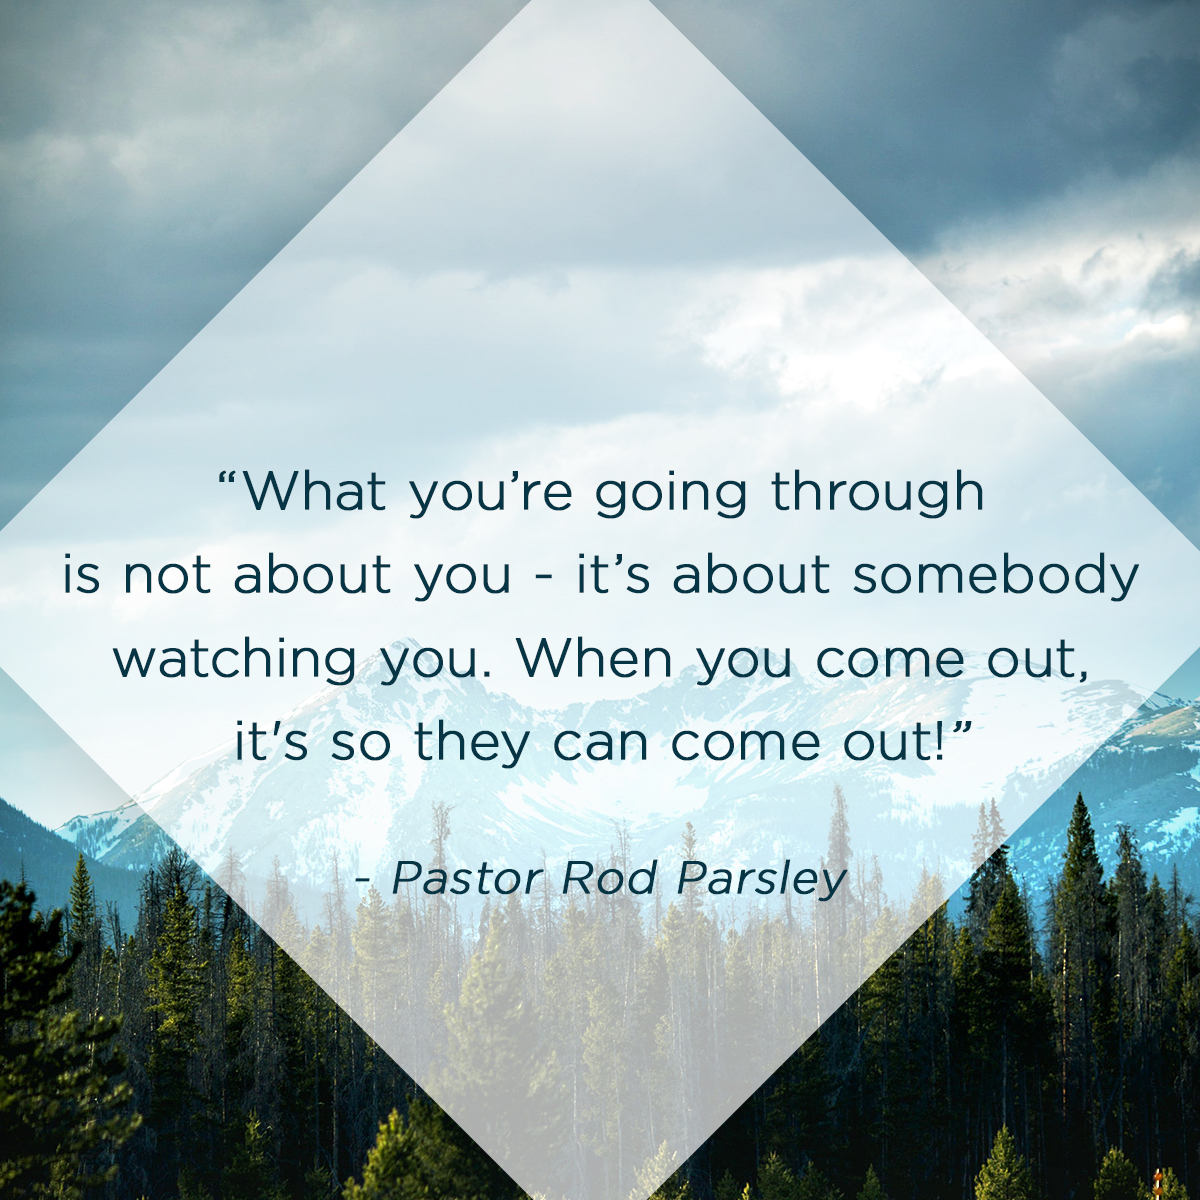 “What you’re going through is not about you - it’s about somebody watching you. When you come out, it's so they can come out!” - Pastor Rod Parsley